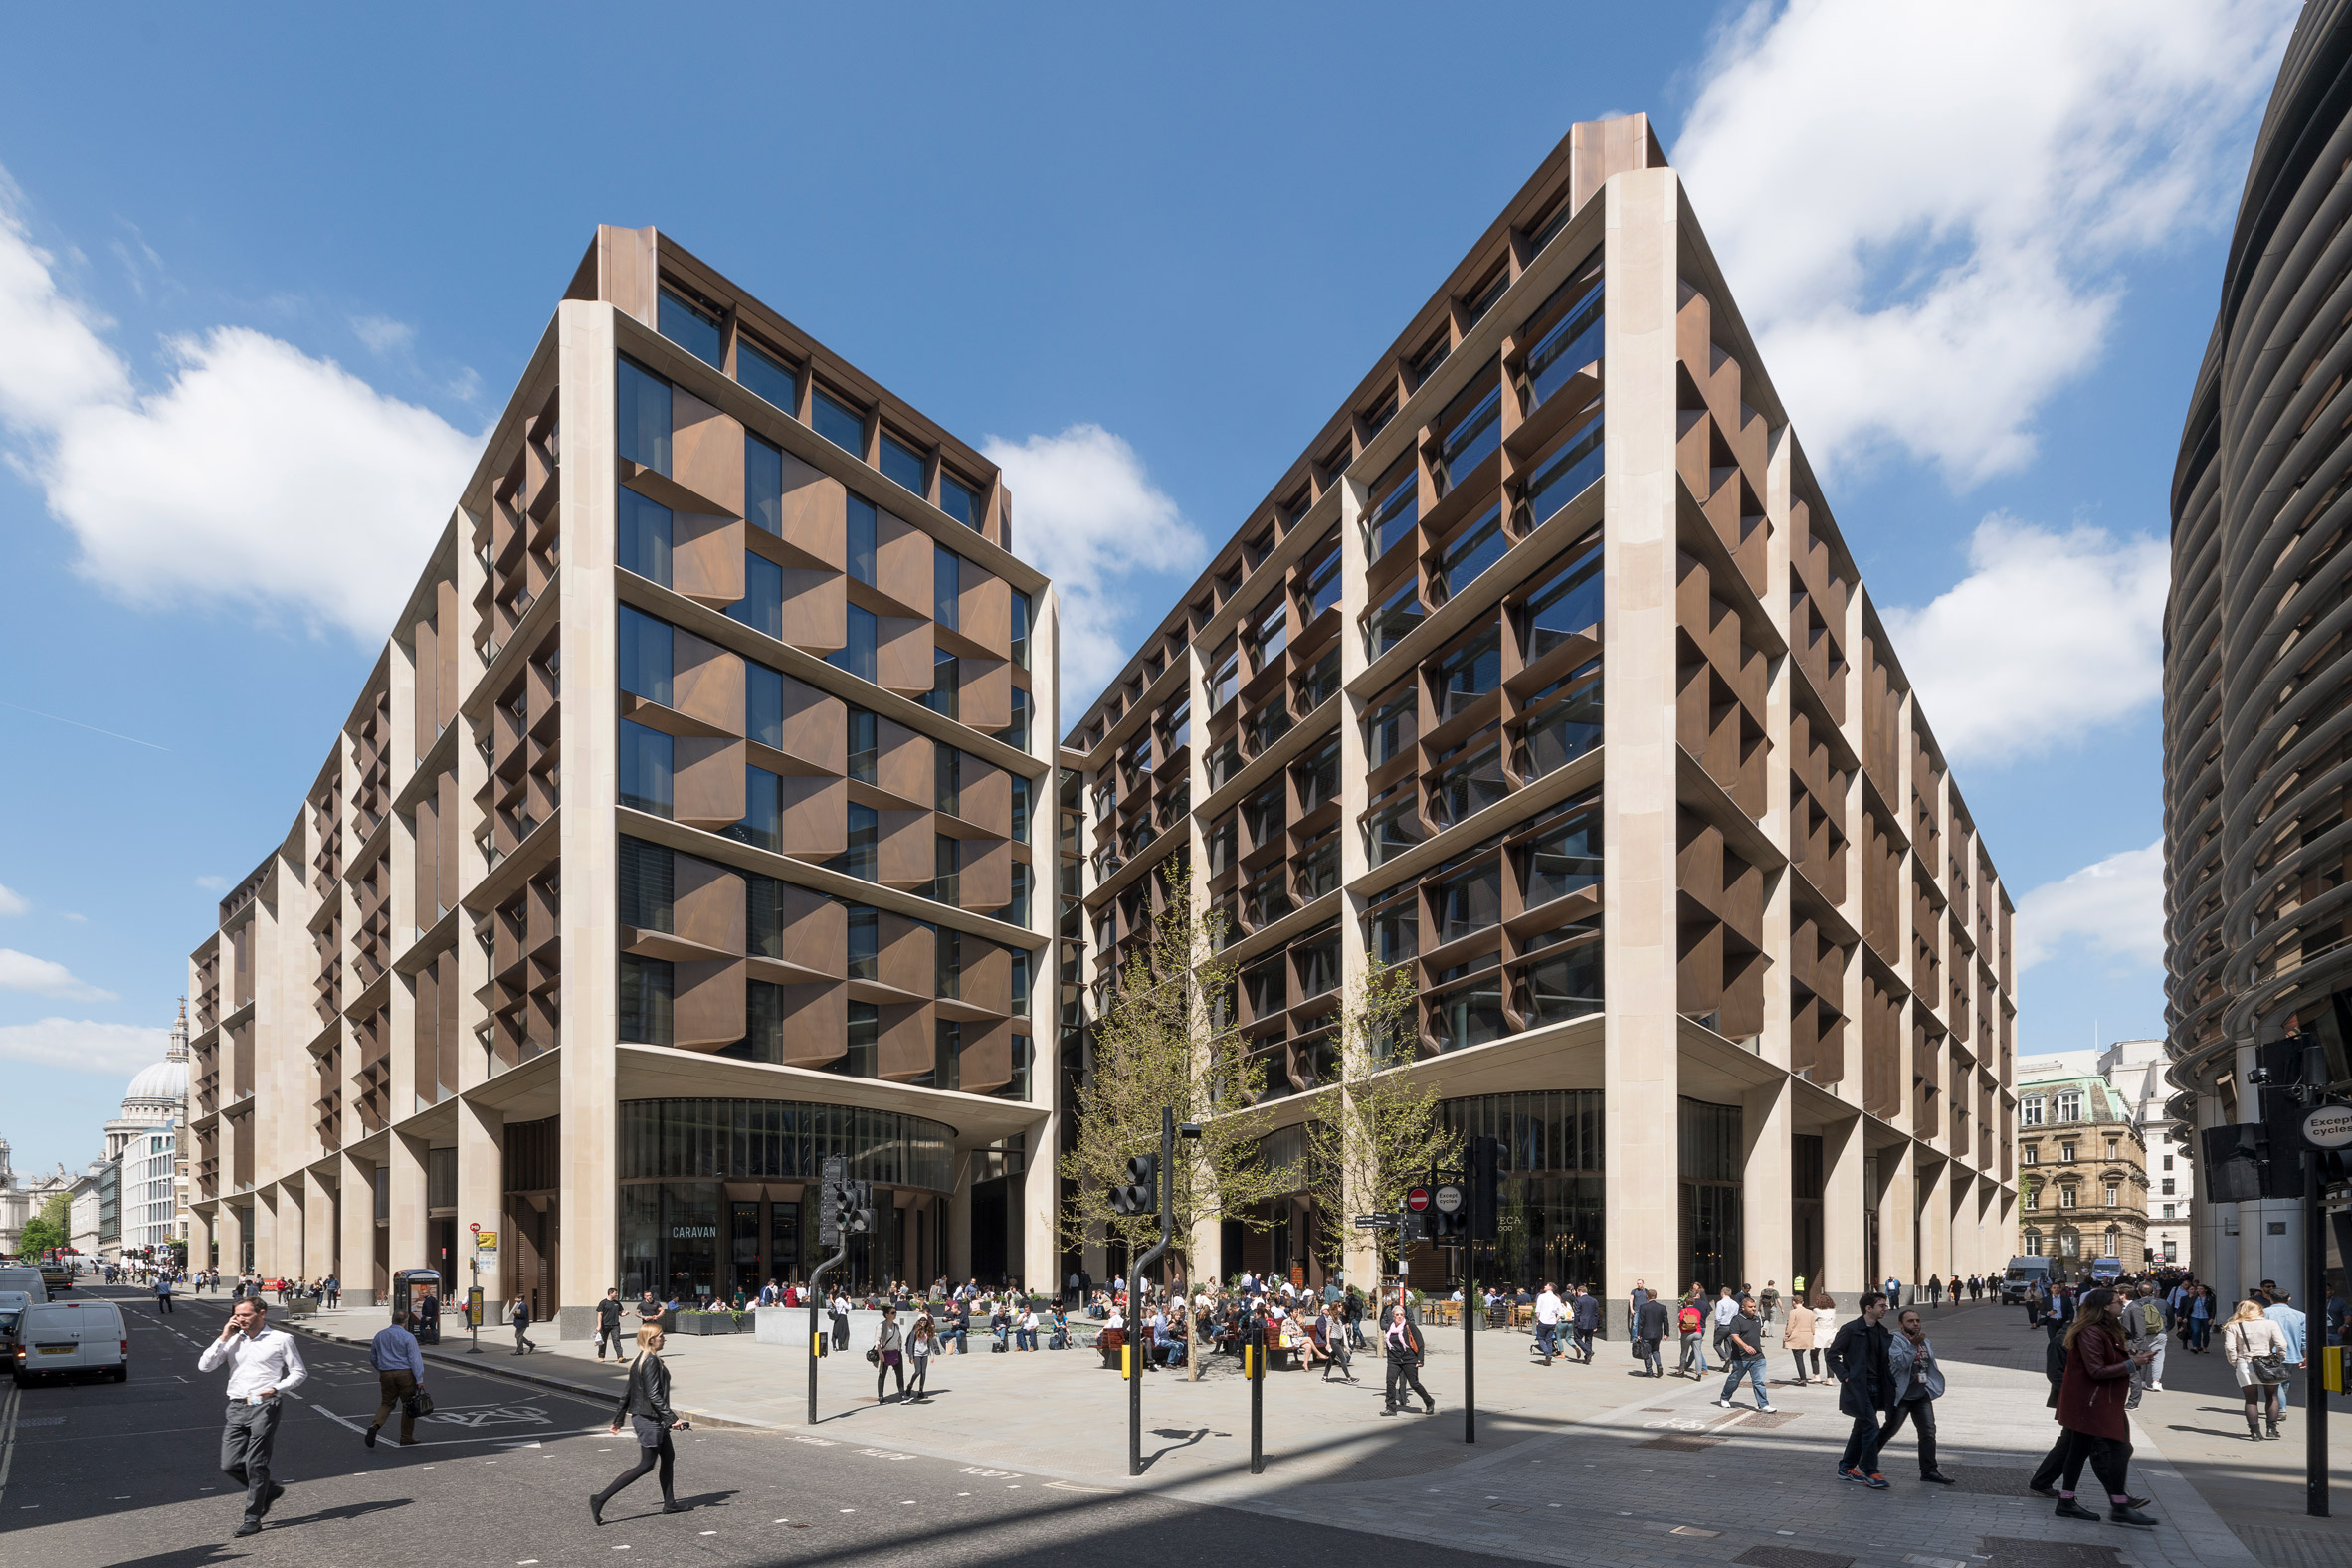 Foster + Partners' Bloomberg HQ wins 2018 Stirling Prize